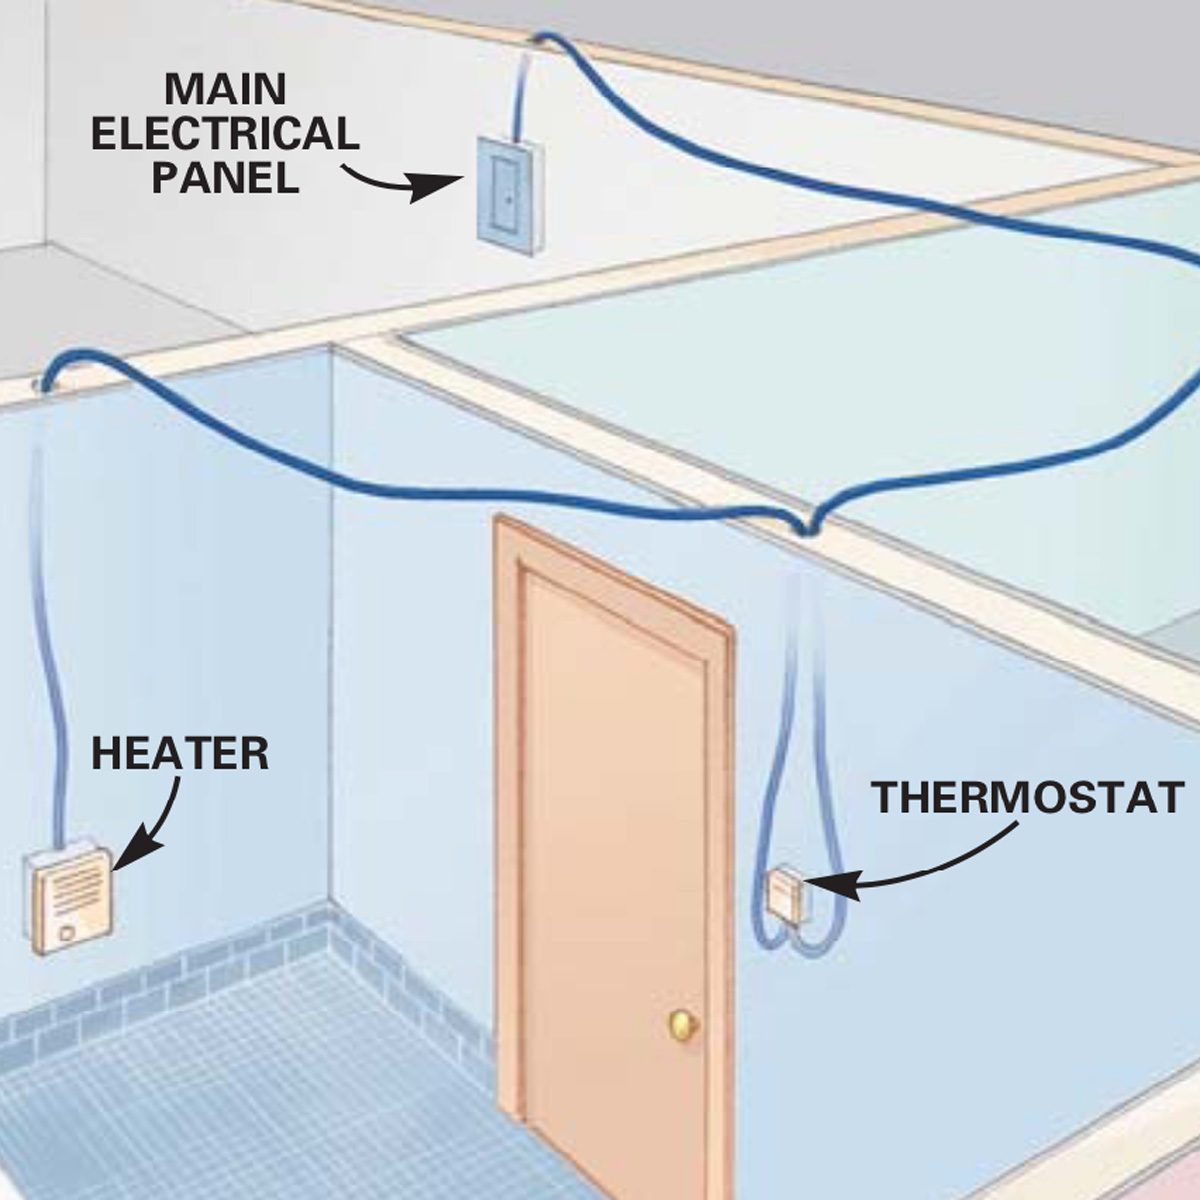 How To Install Electric Heaters | Family Handyman